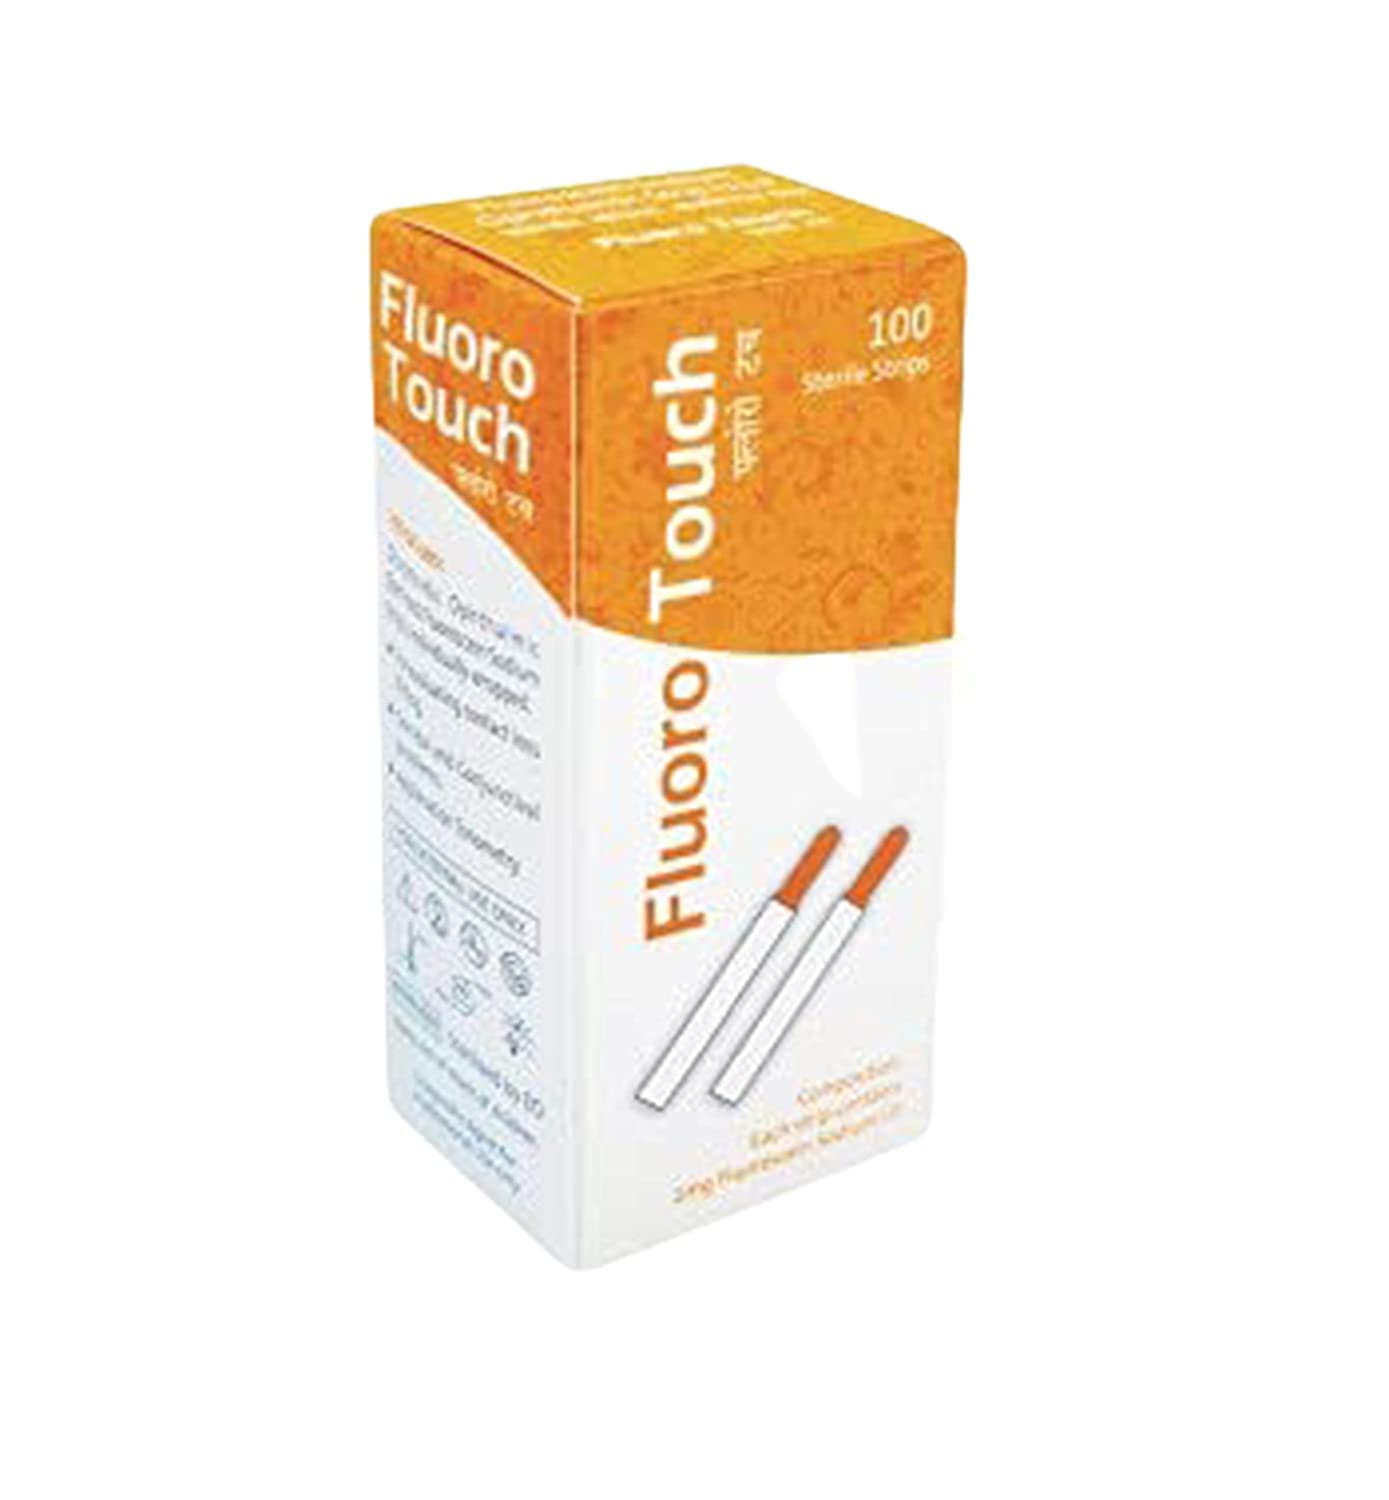 Ophthalmic Fluoro Touch Strips - 100 Strips by KASHSURG